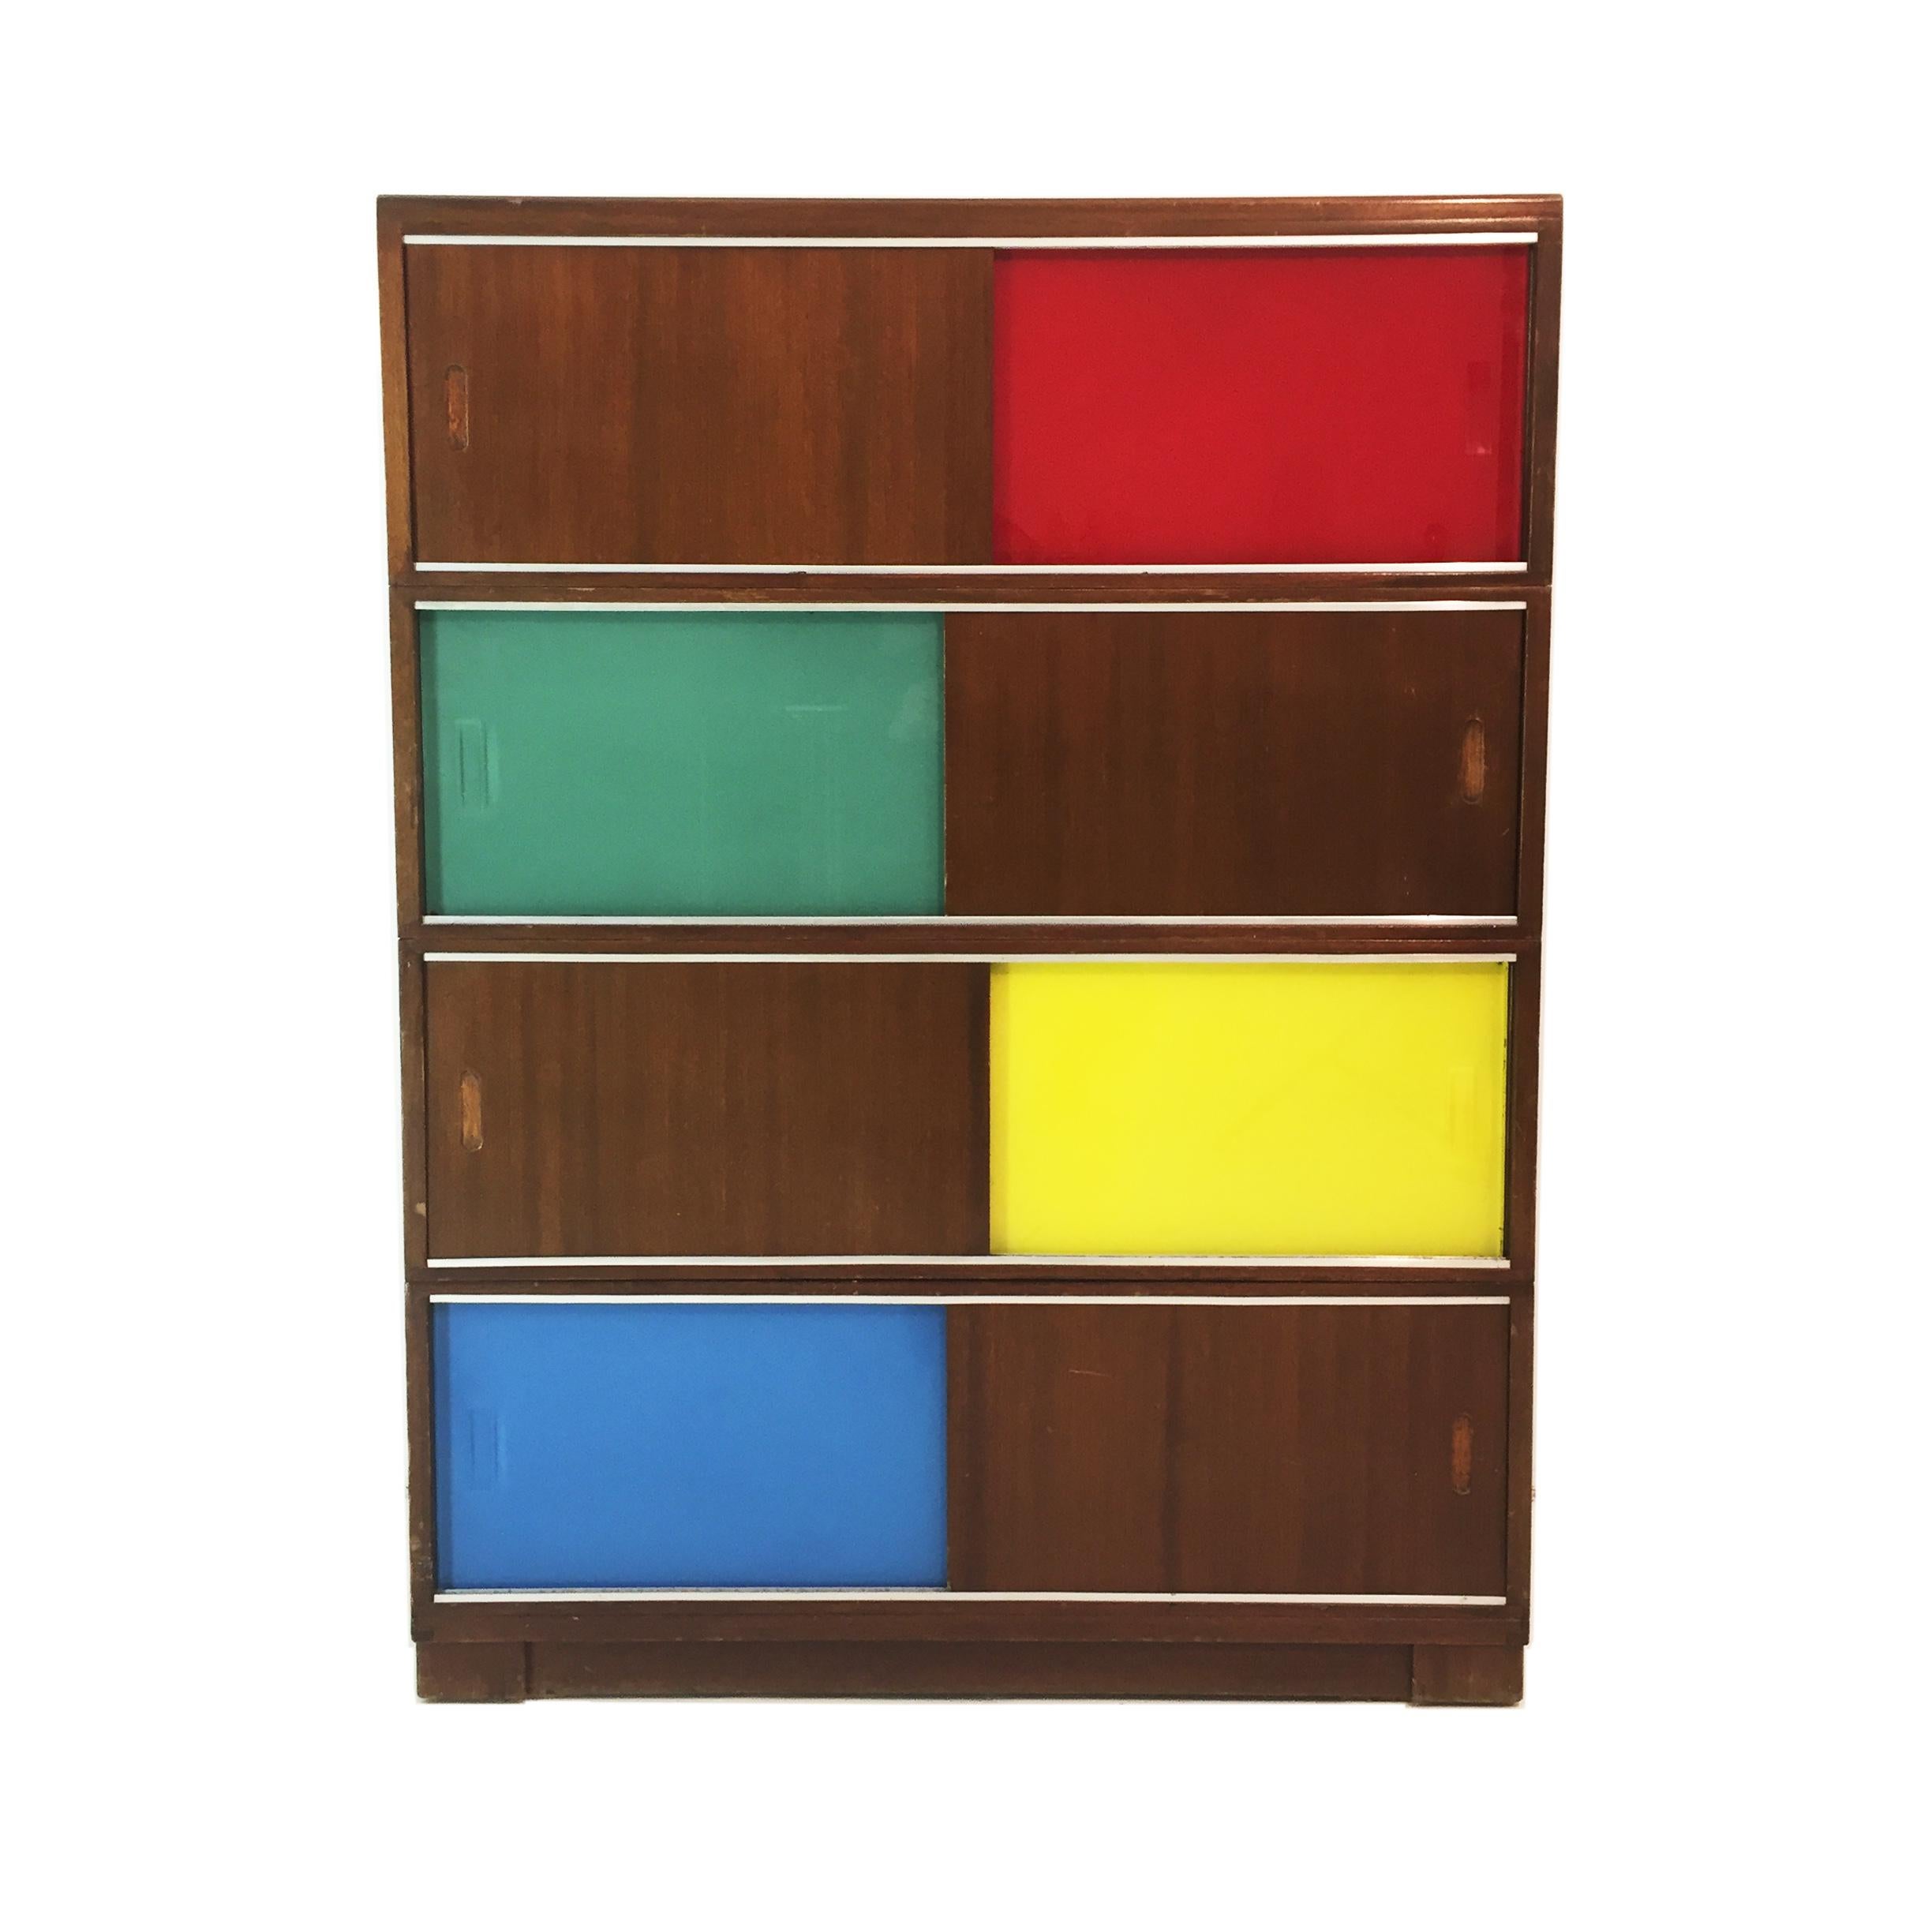 A sliding door cabinet with glass and wood panels. The glass panels are colored in pure Mid-Century Modern tones and in the style of Le Corbusier. The design and colored slide doors resemble those of Claude Vassal cabinets. A truly practical and